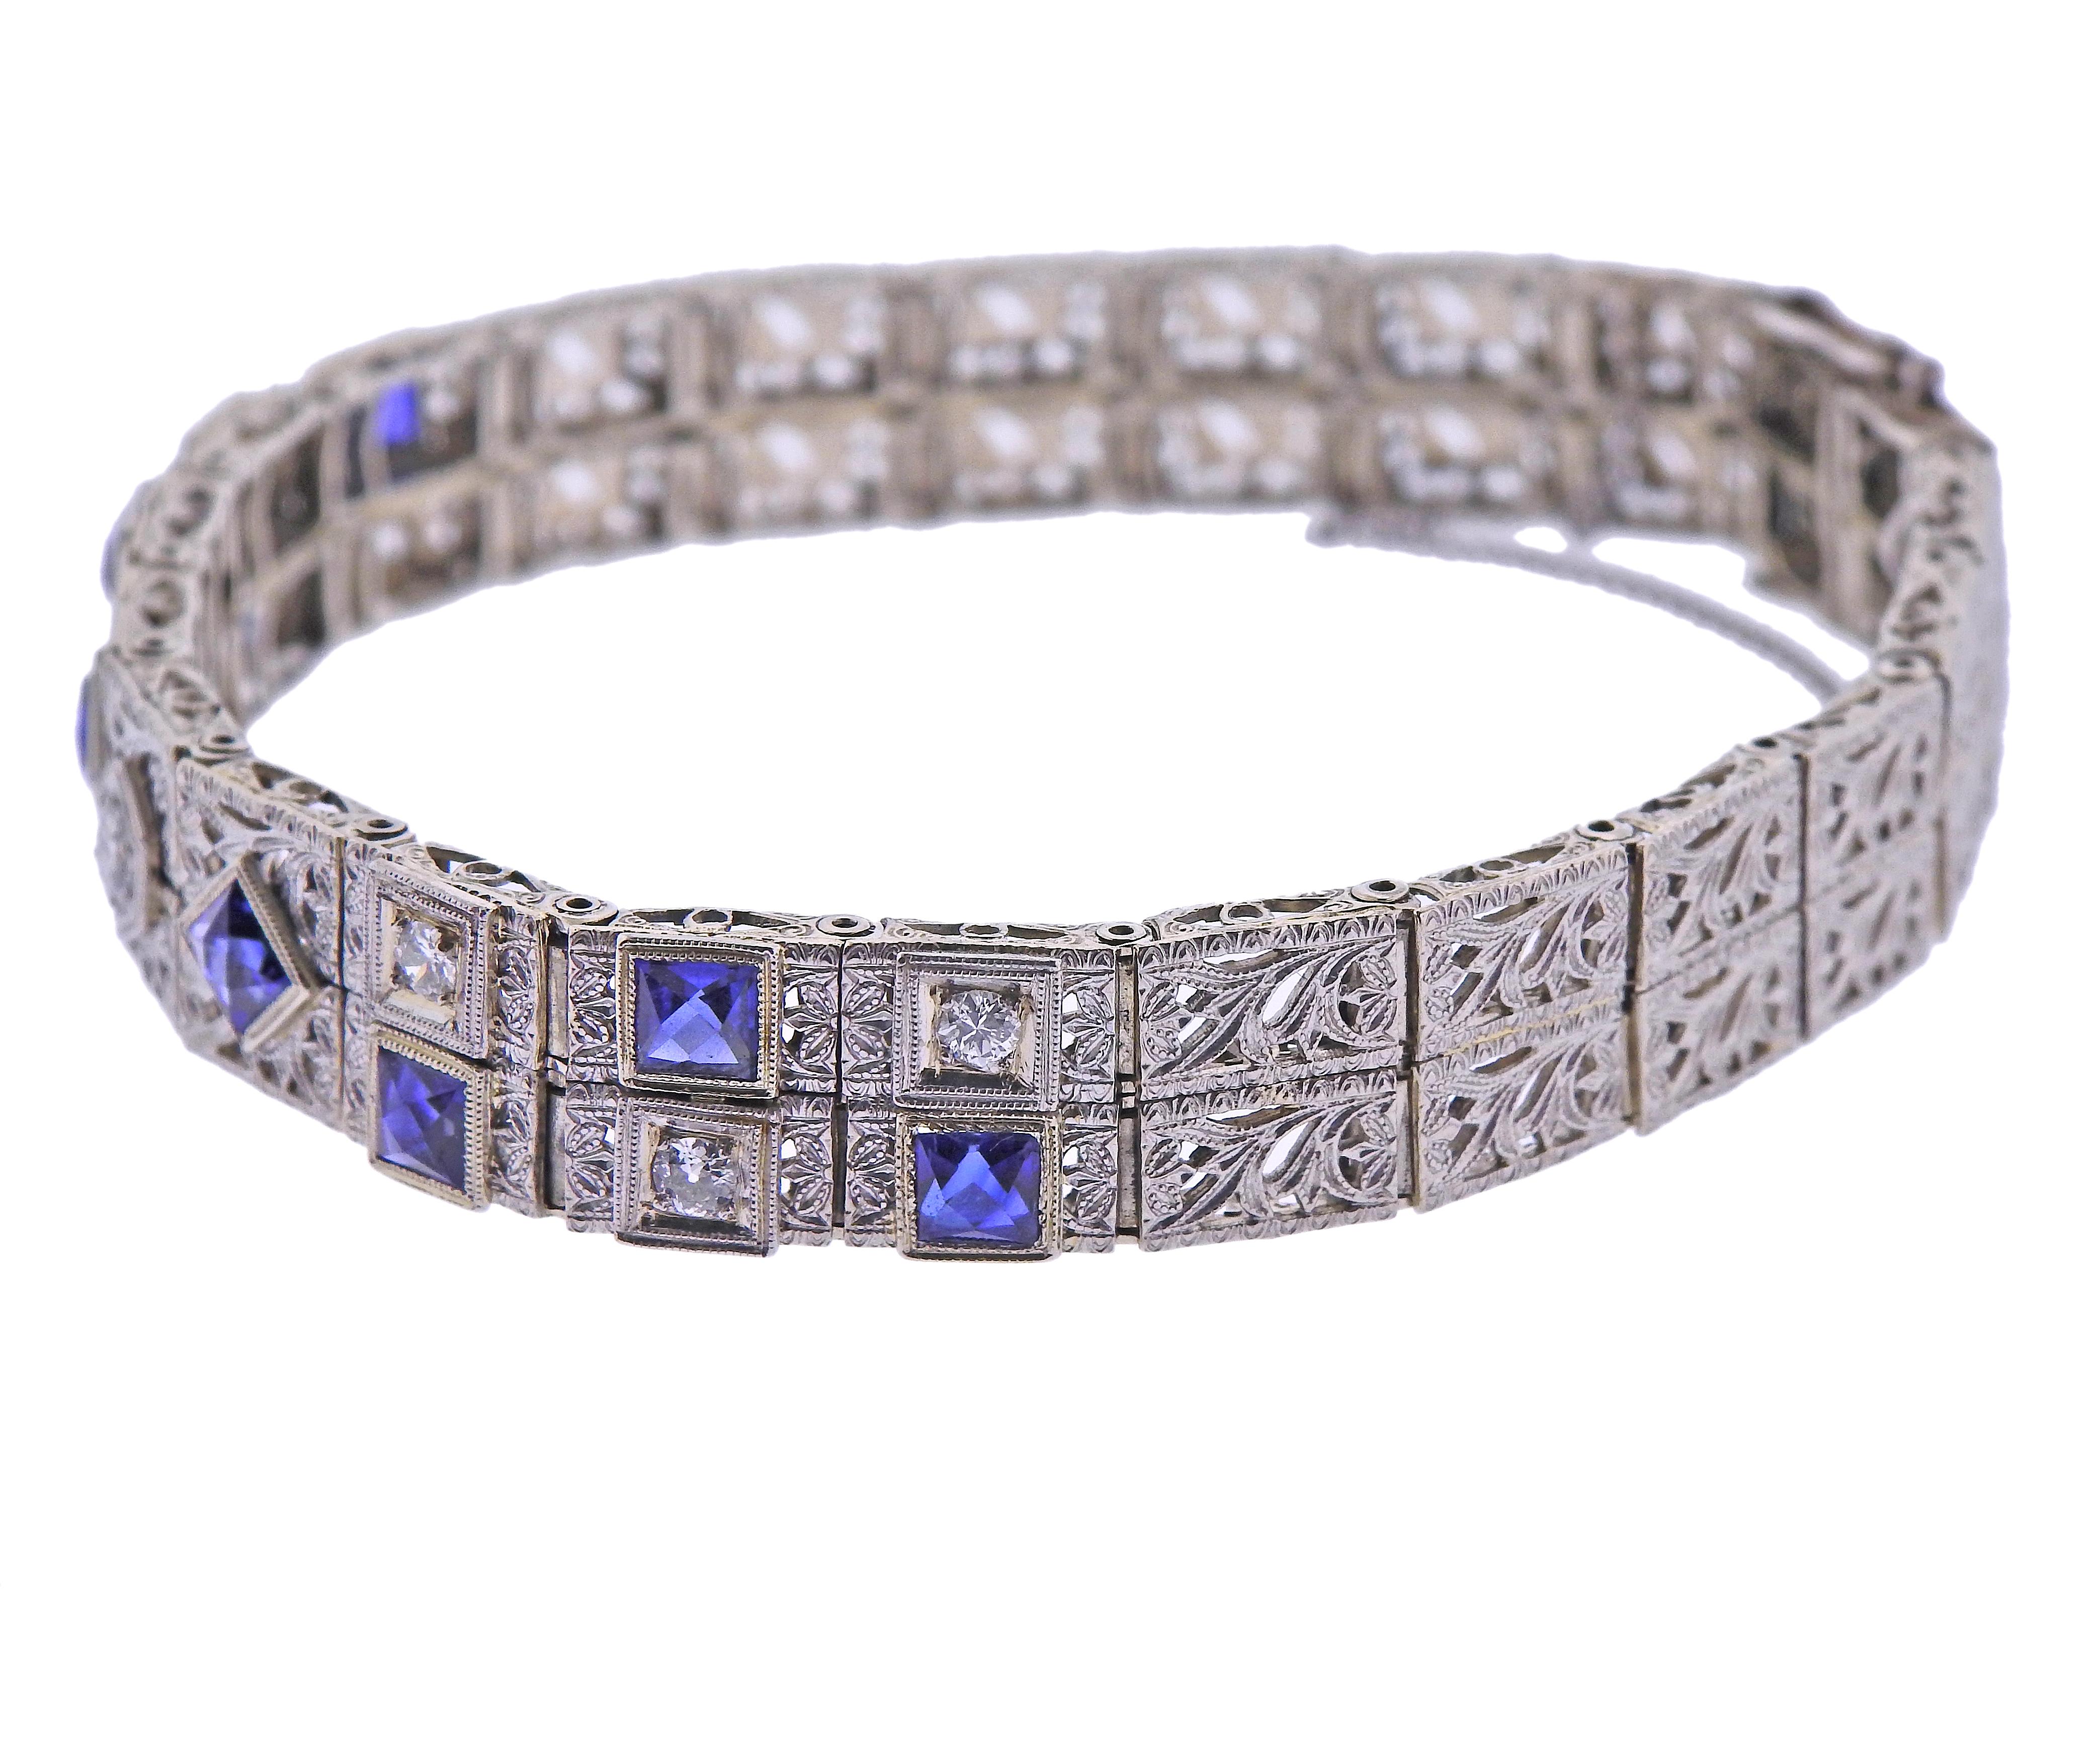 Art Deco Filigree 14k gold bracelet, with synthetic blue sapphires and 0.40ctw in diamonds. Bracelet is 7